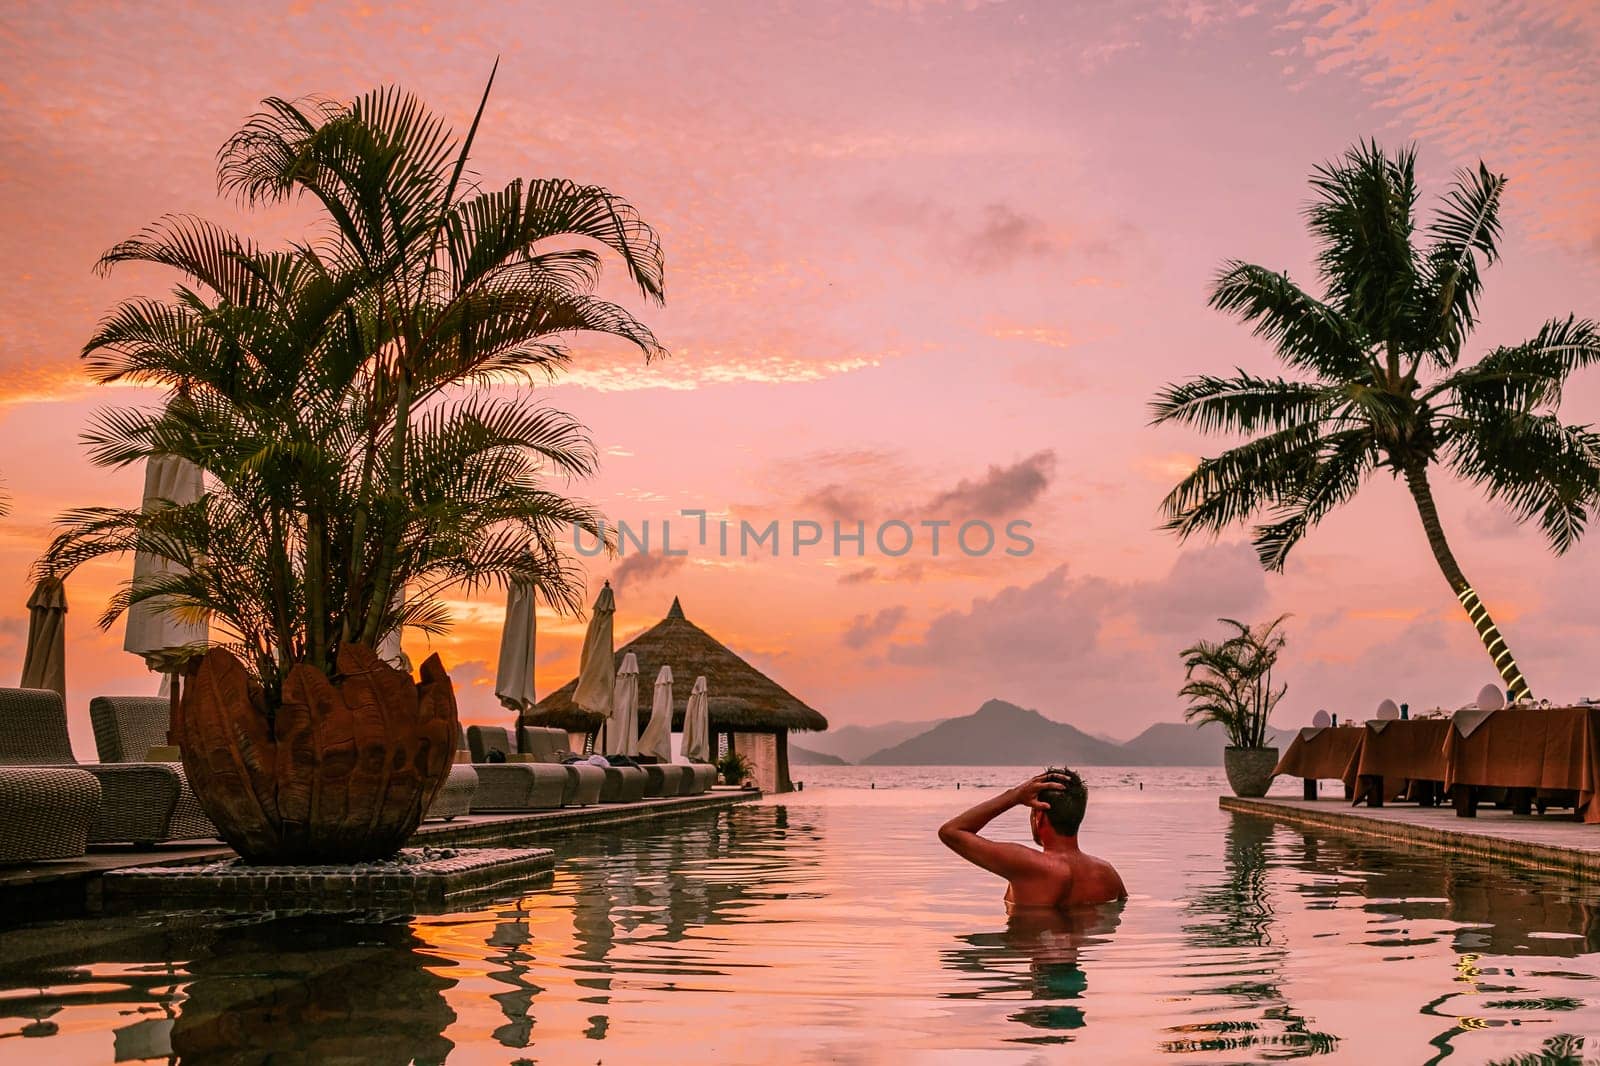 young men in a swimming pool during sunset, a Luxury swimming pool in a tropical resort, and relaxing holidays in the Seychelles islands. La Digue, a Young guy during sunset by the swimming pool